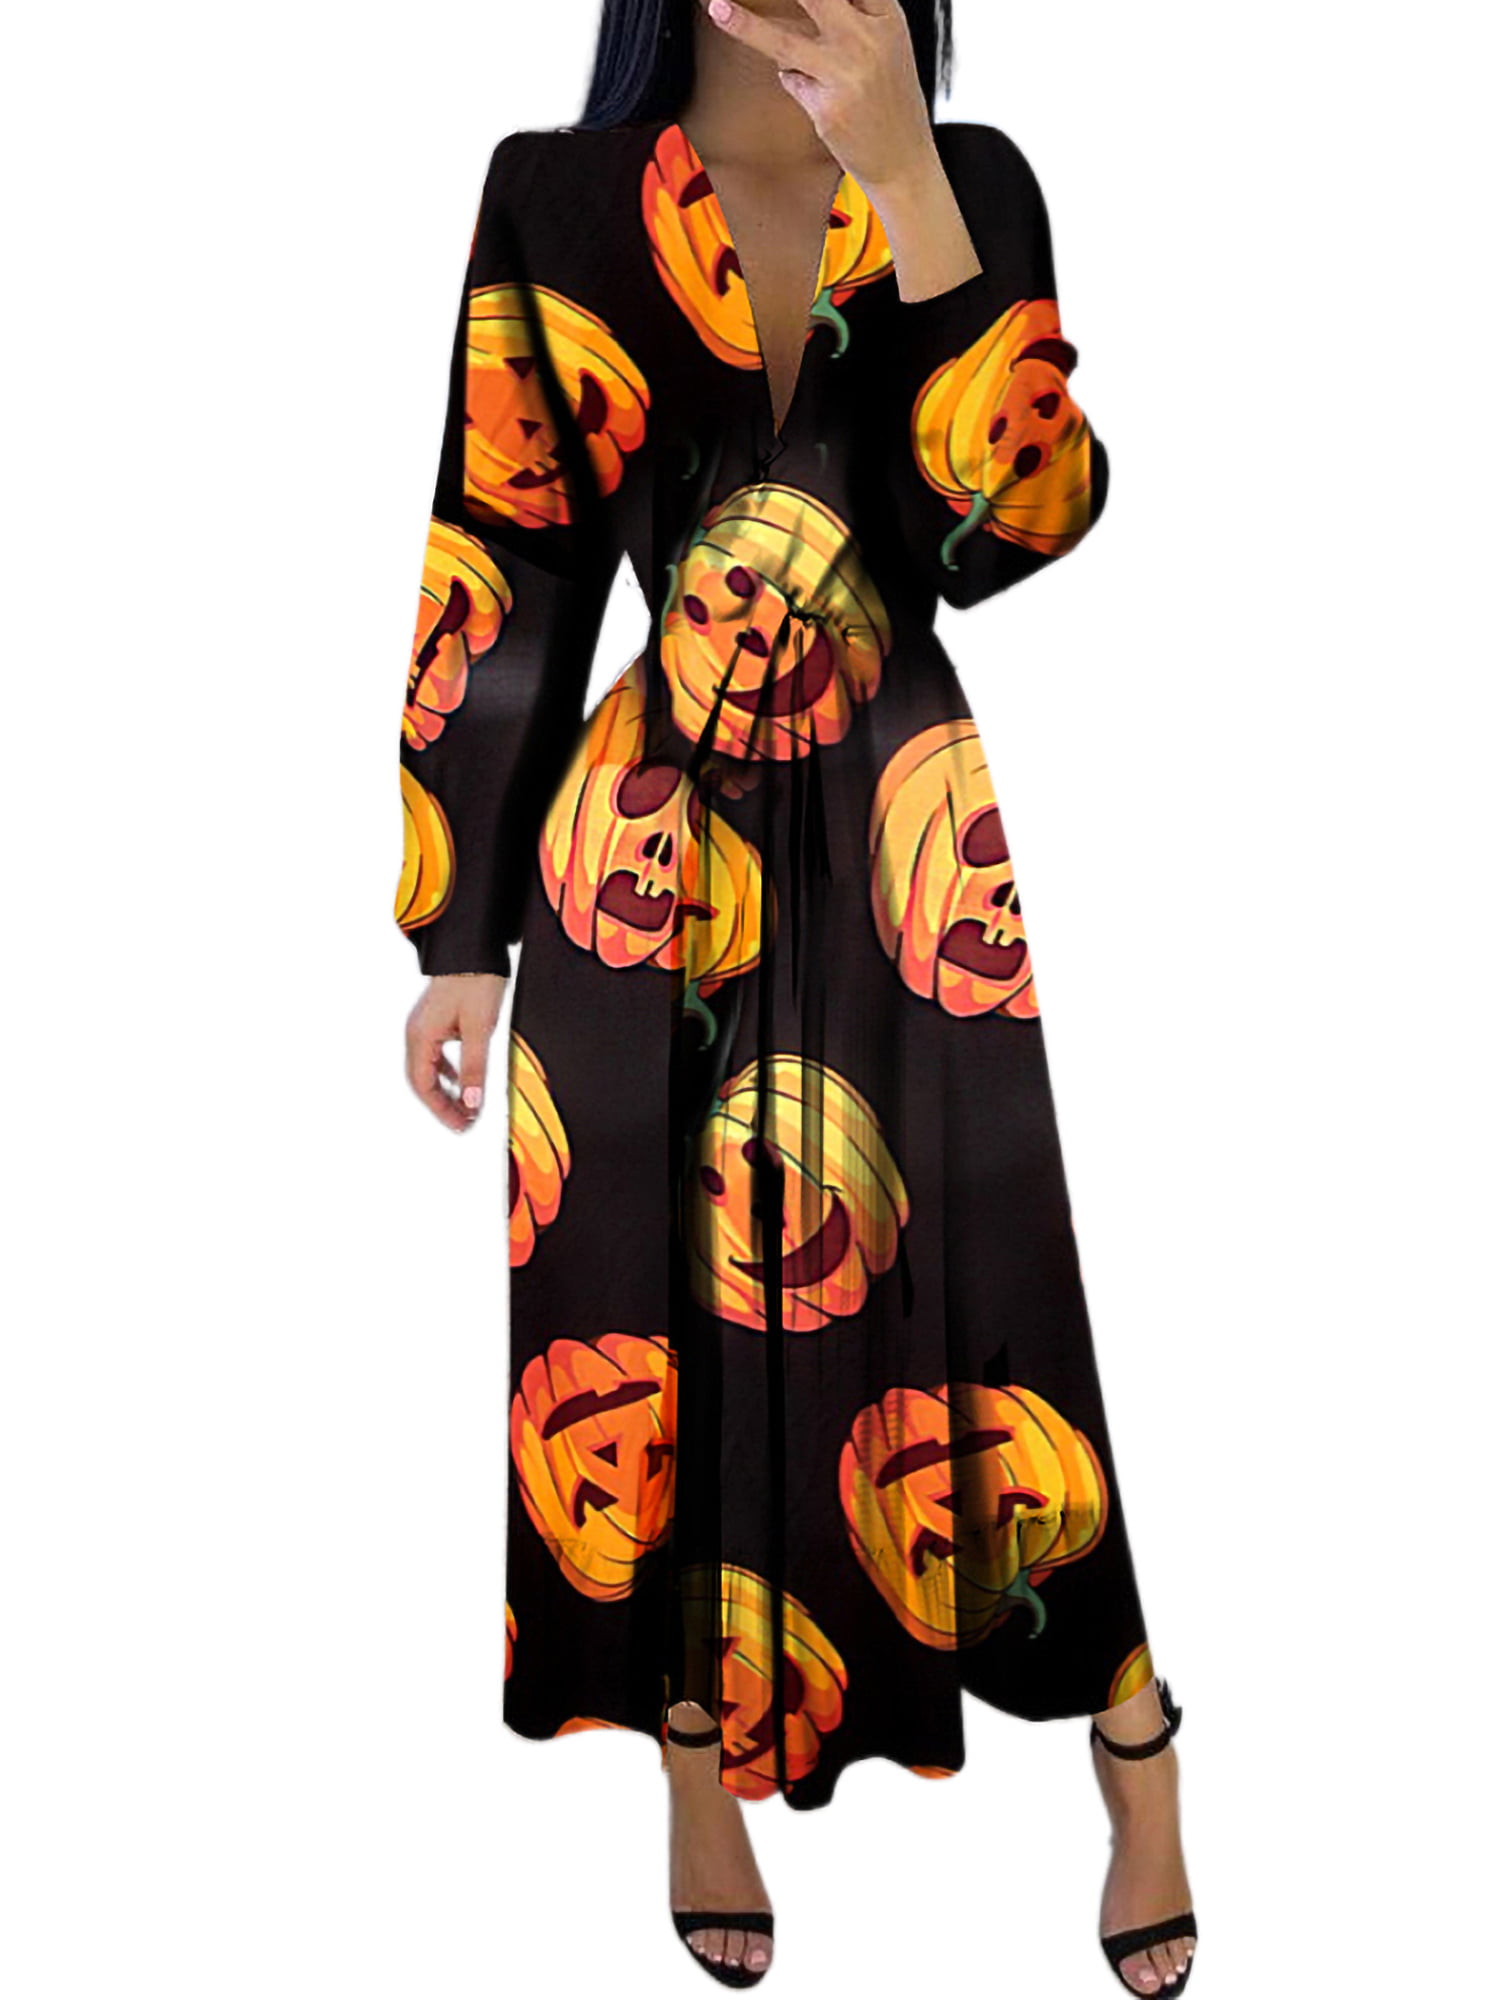 Womens Dresses Halloween Costume Party Ball Gown V Neck Long Sleeve Pumpkin Printed Big Swing Prom Dress